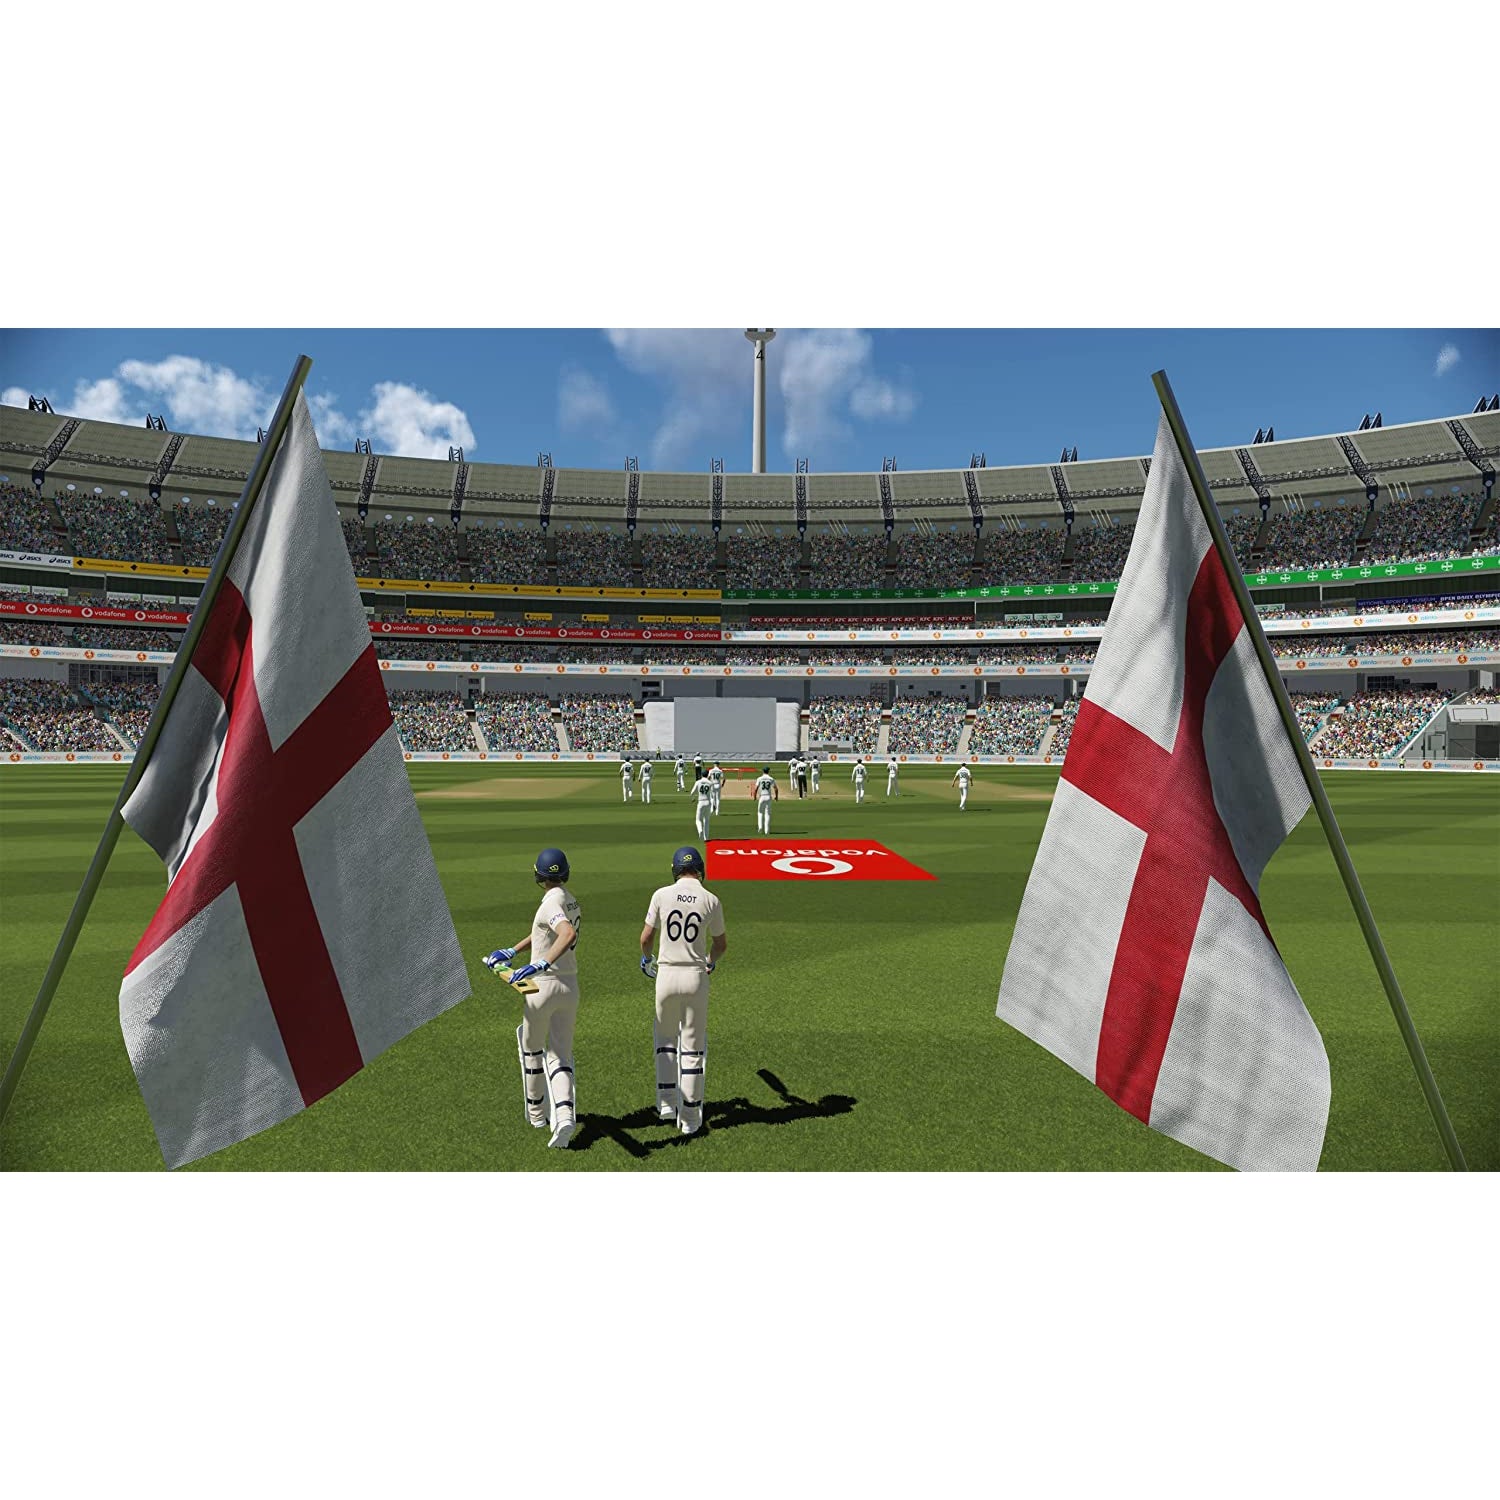 Cricket 22 - The Official Game of The Ashes (Nintendo Switch)